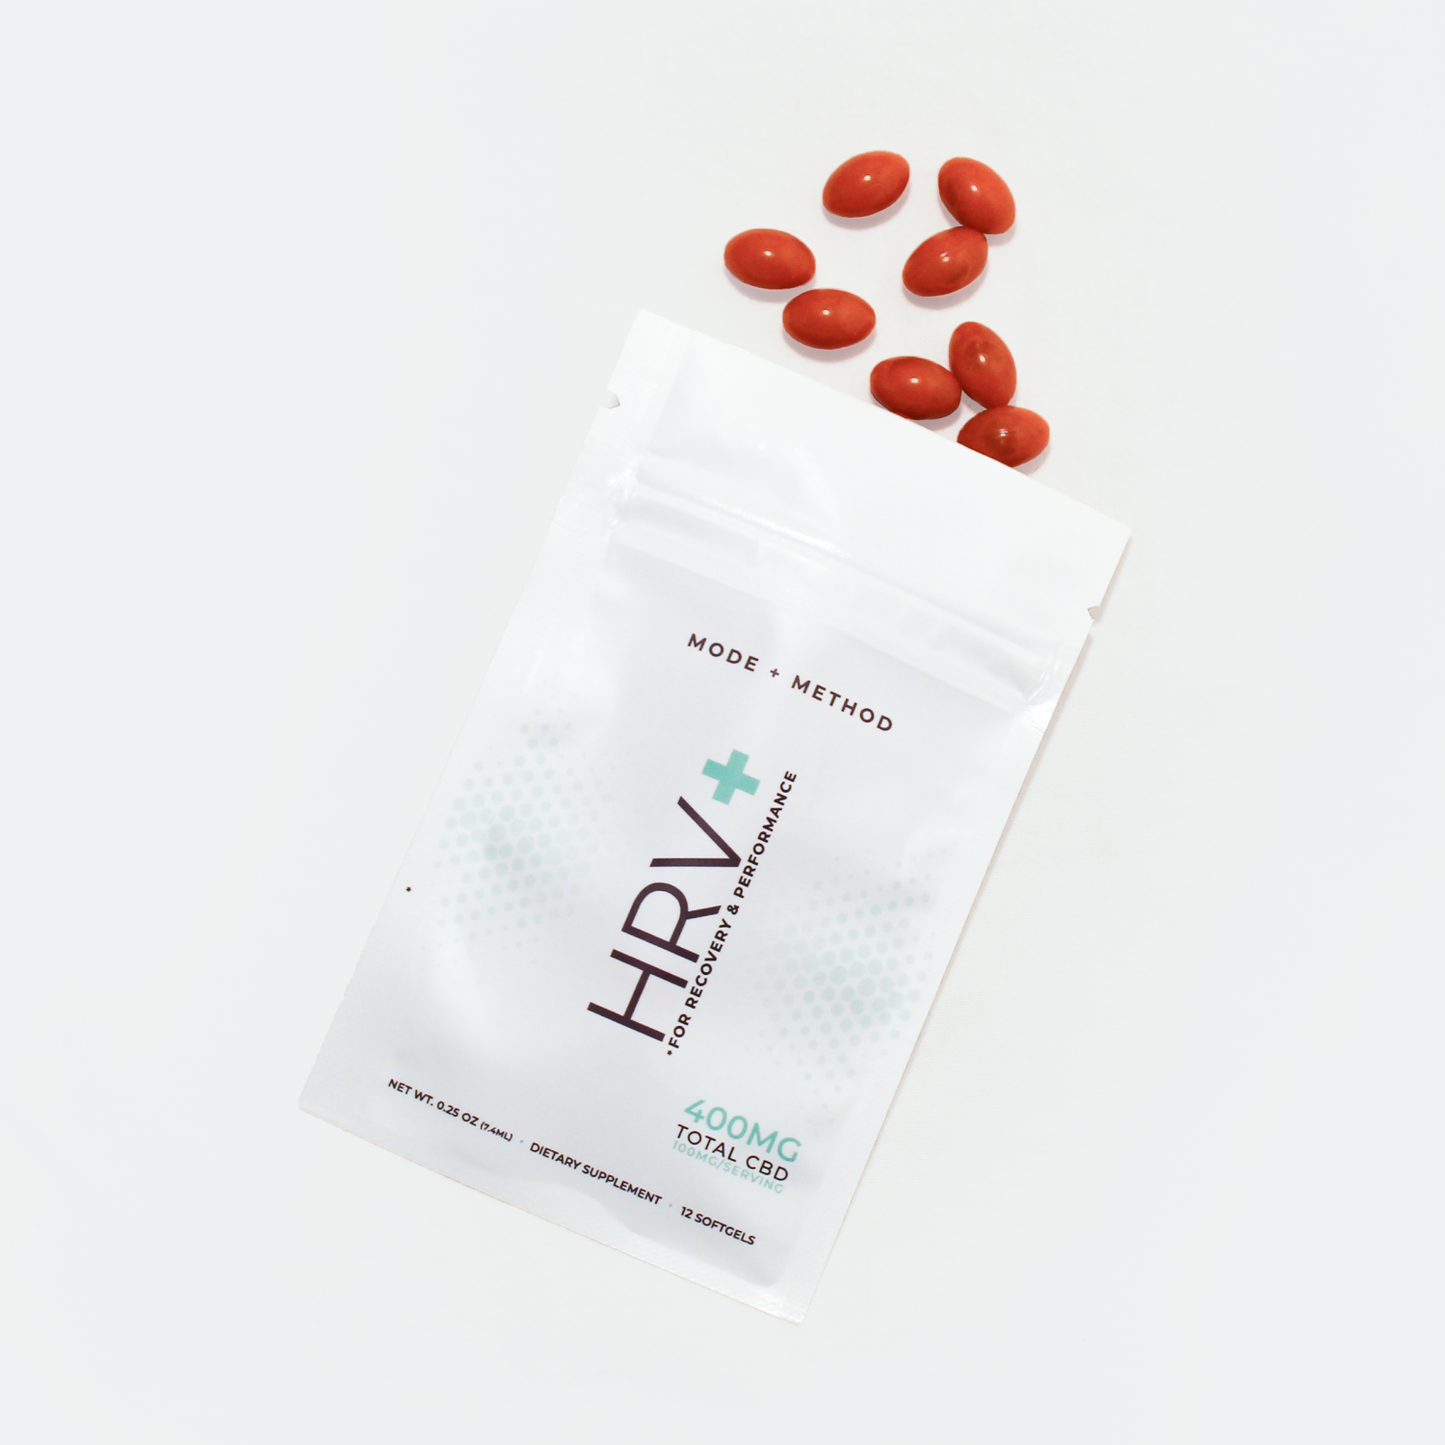 HRV+ Heart Rate Variability Booster Supplement by Mode+Method gummies on a white background.